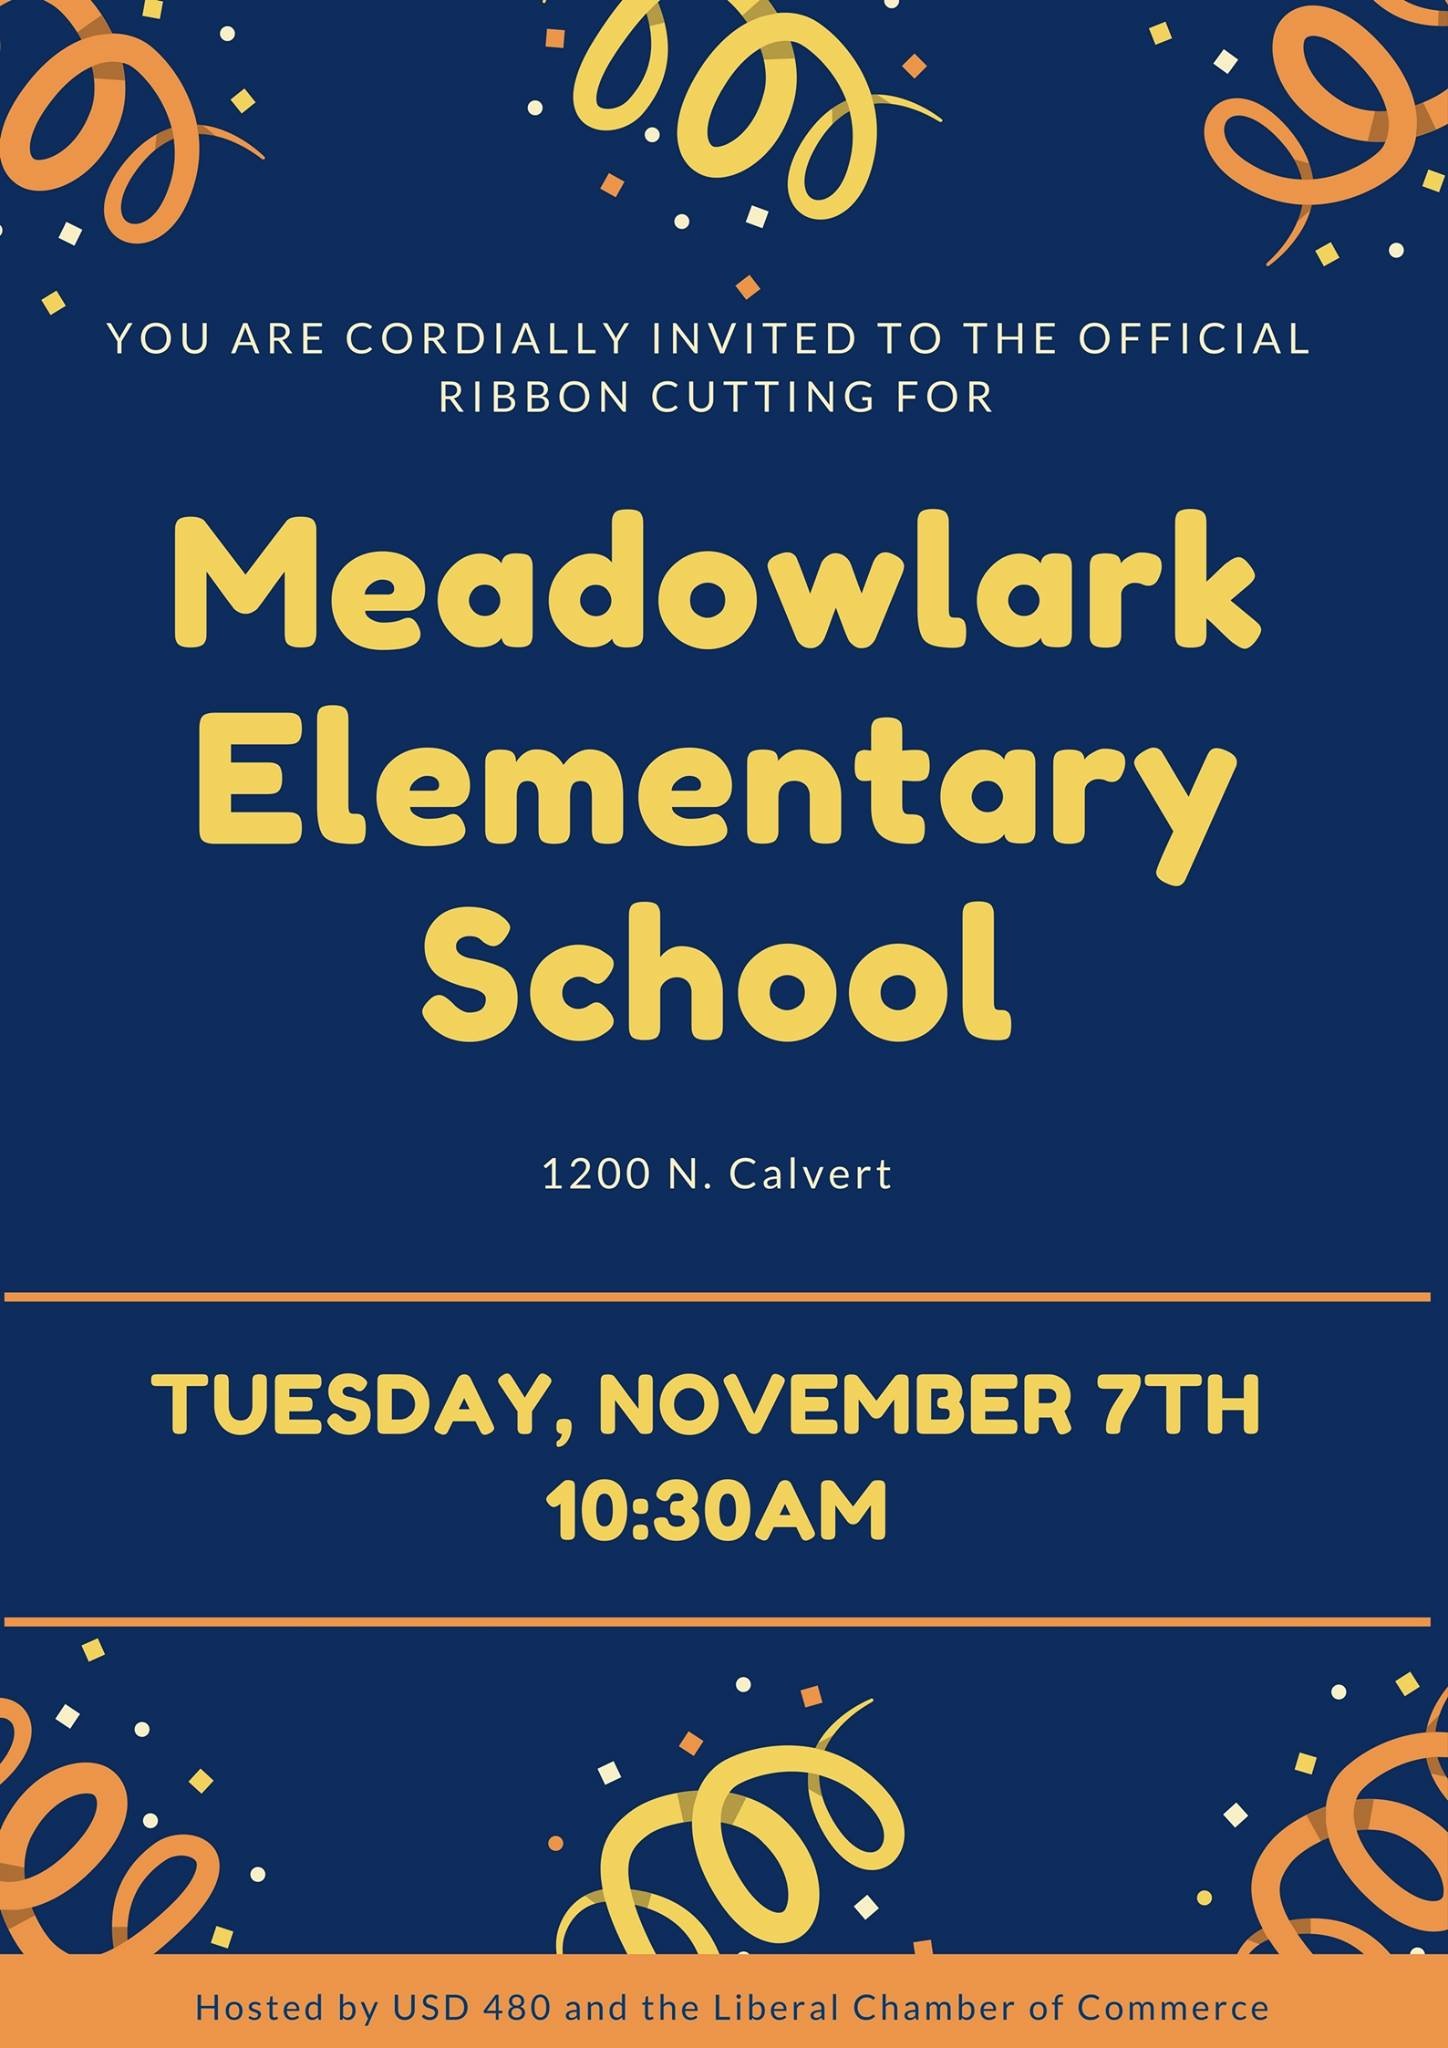 Ribbon Cutting to Be Held at Meadowlark Elementary